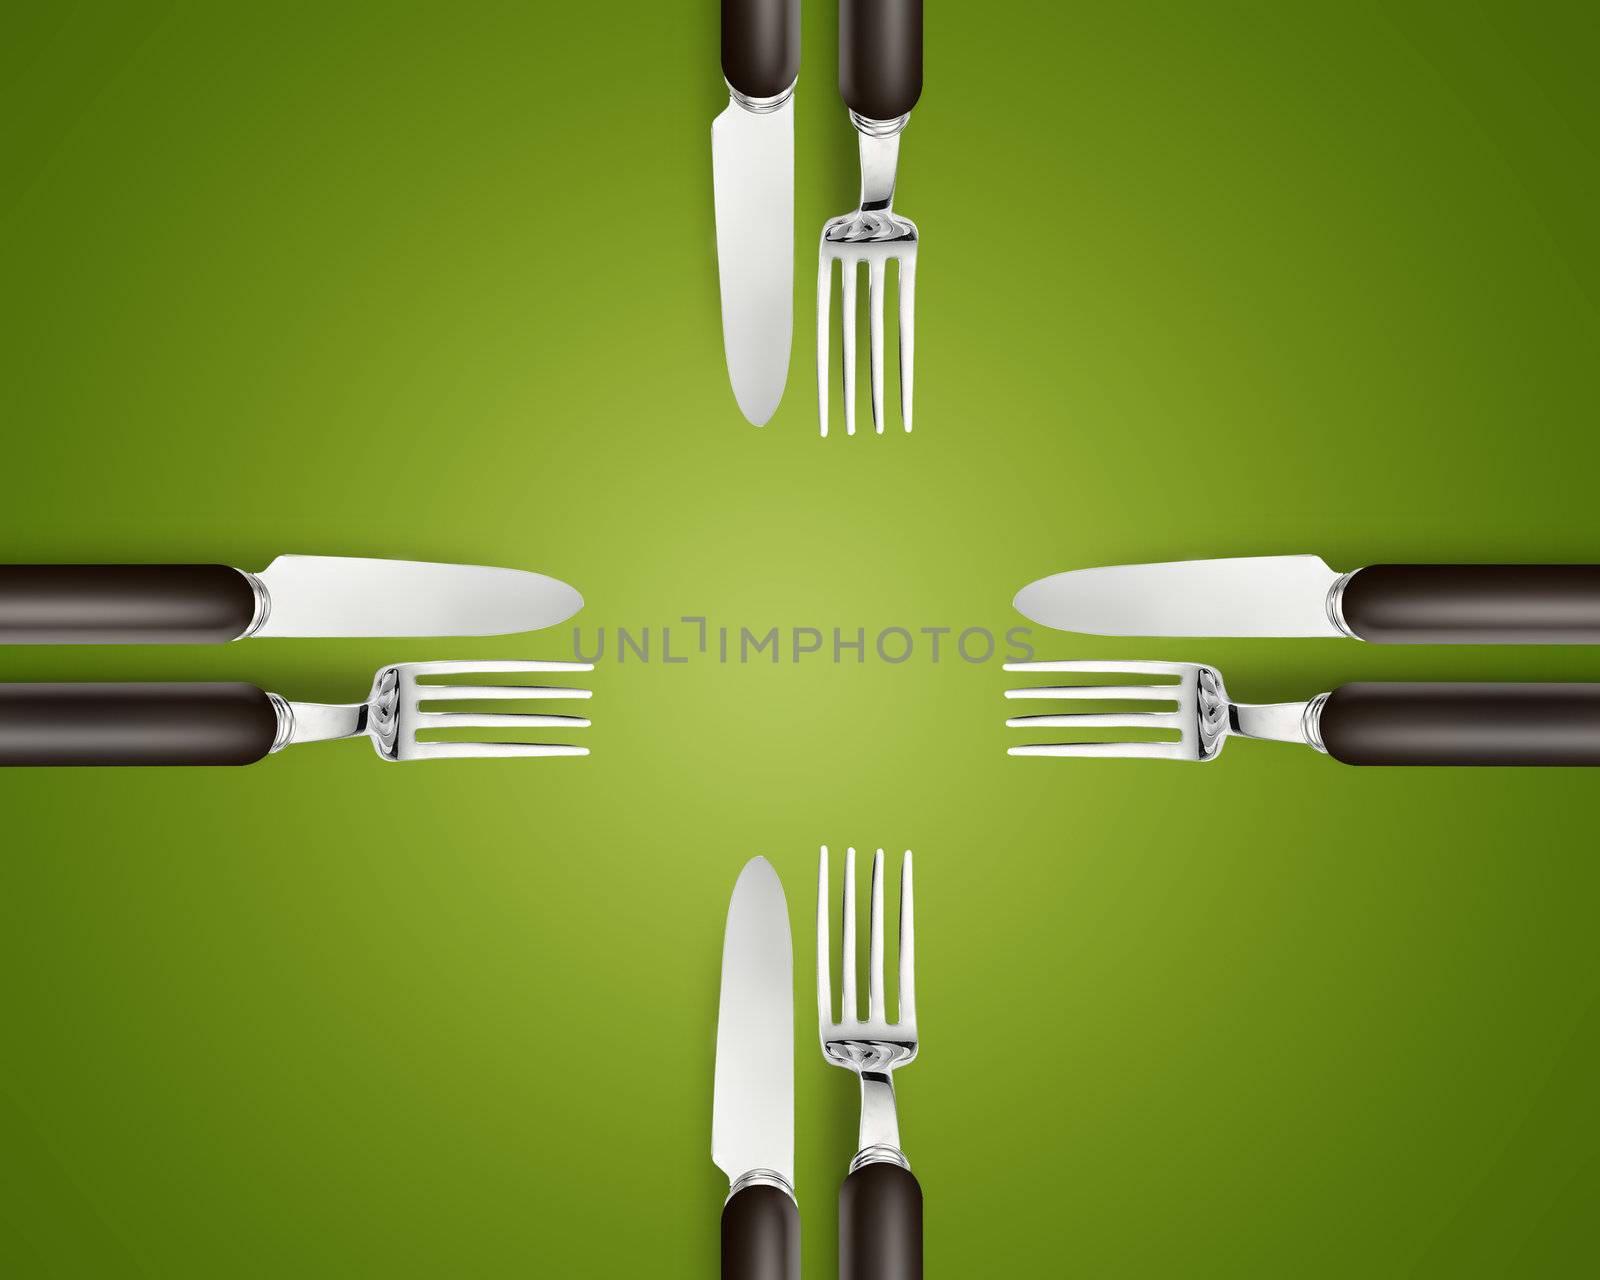 Empty copy space circle in set of knives and forks